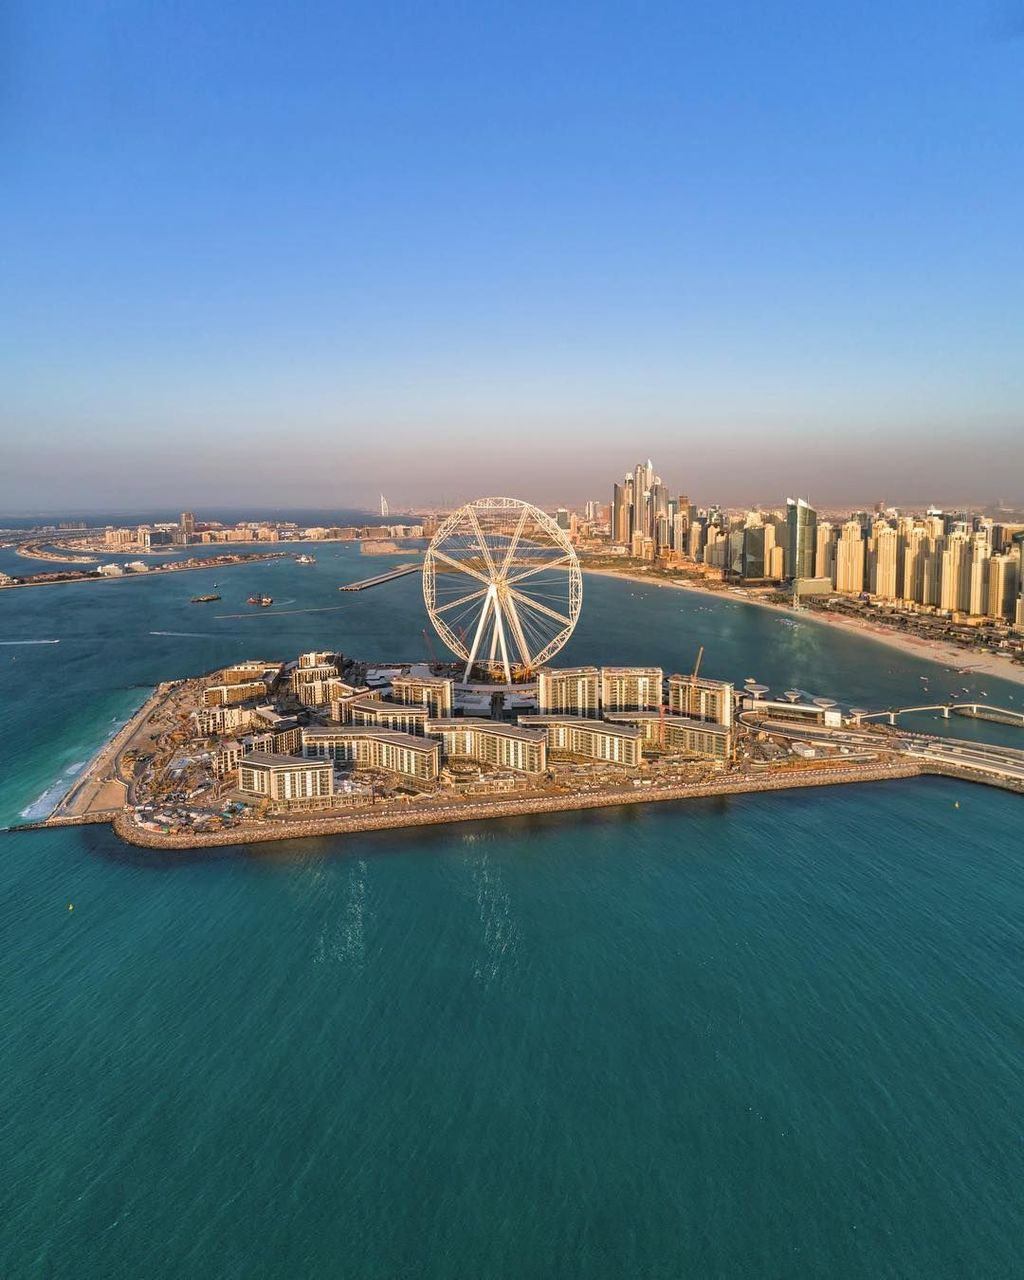 Awesome Photos Of Dubai To Make You Want To Visit It06